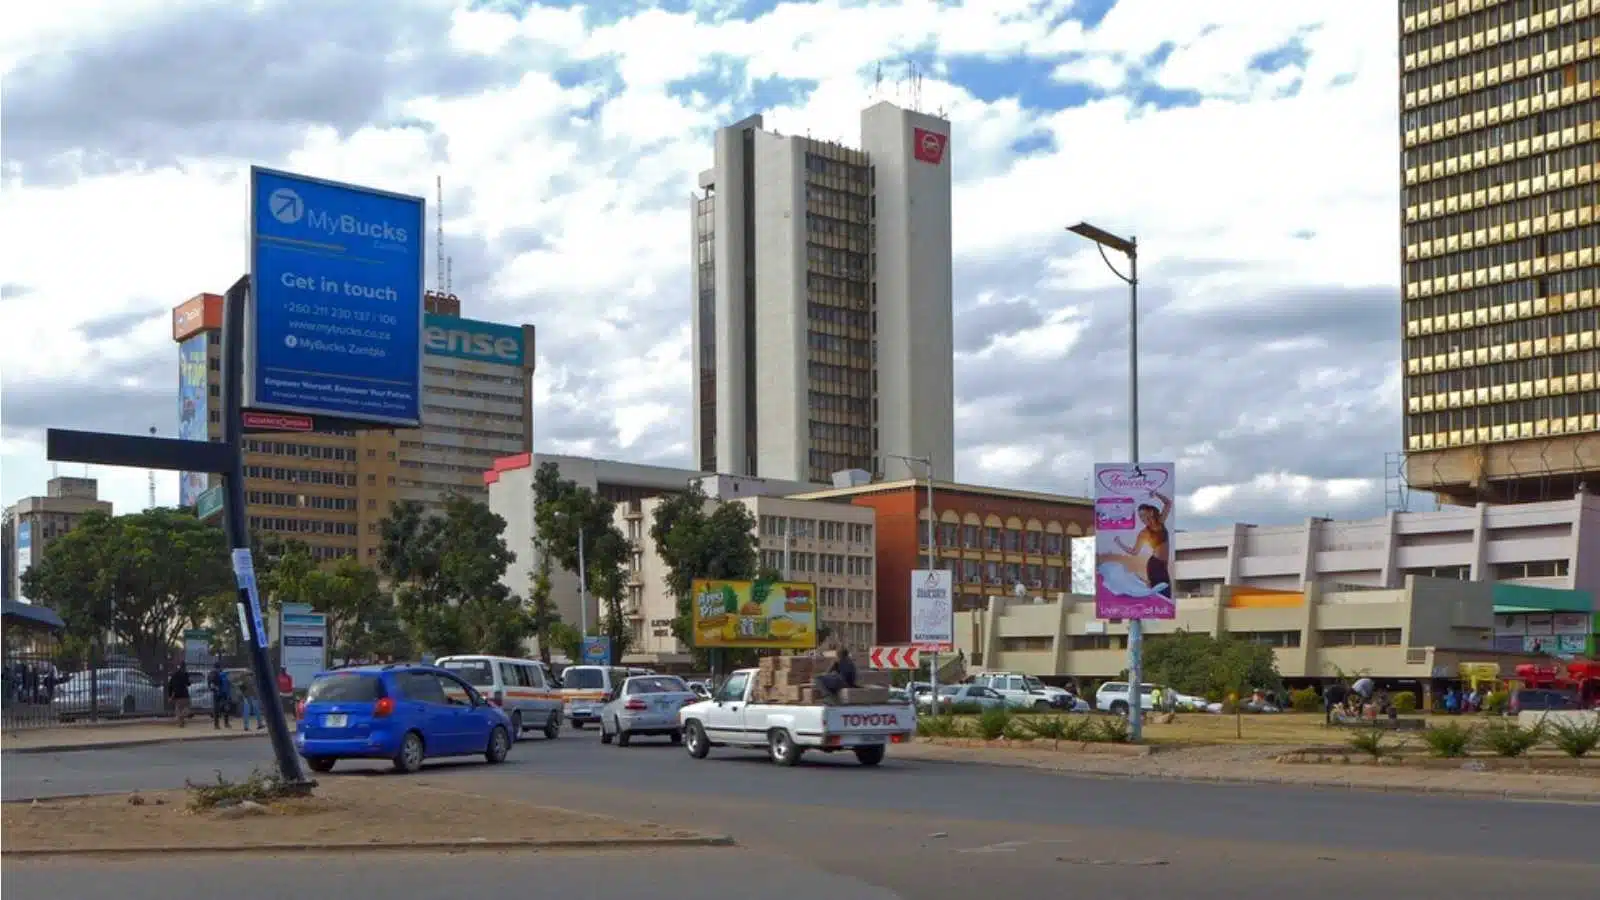 Street traffic in Lusaka, the capital of Zambia, Southern Africa, 2020